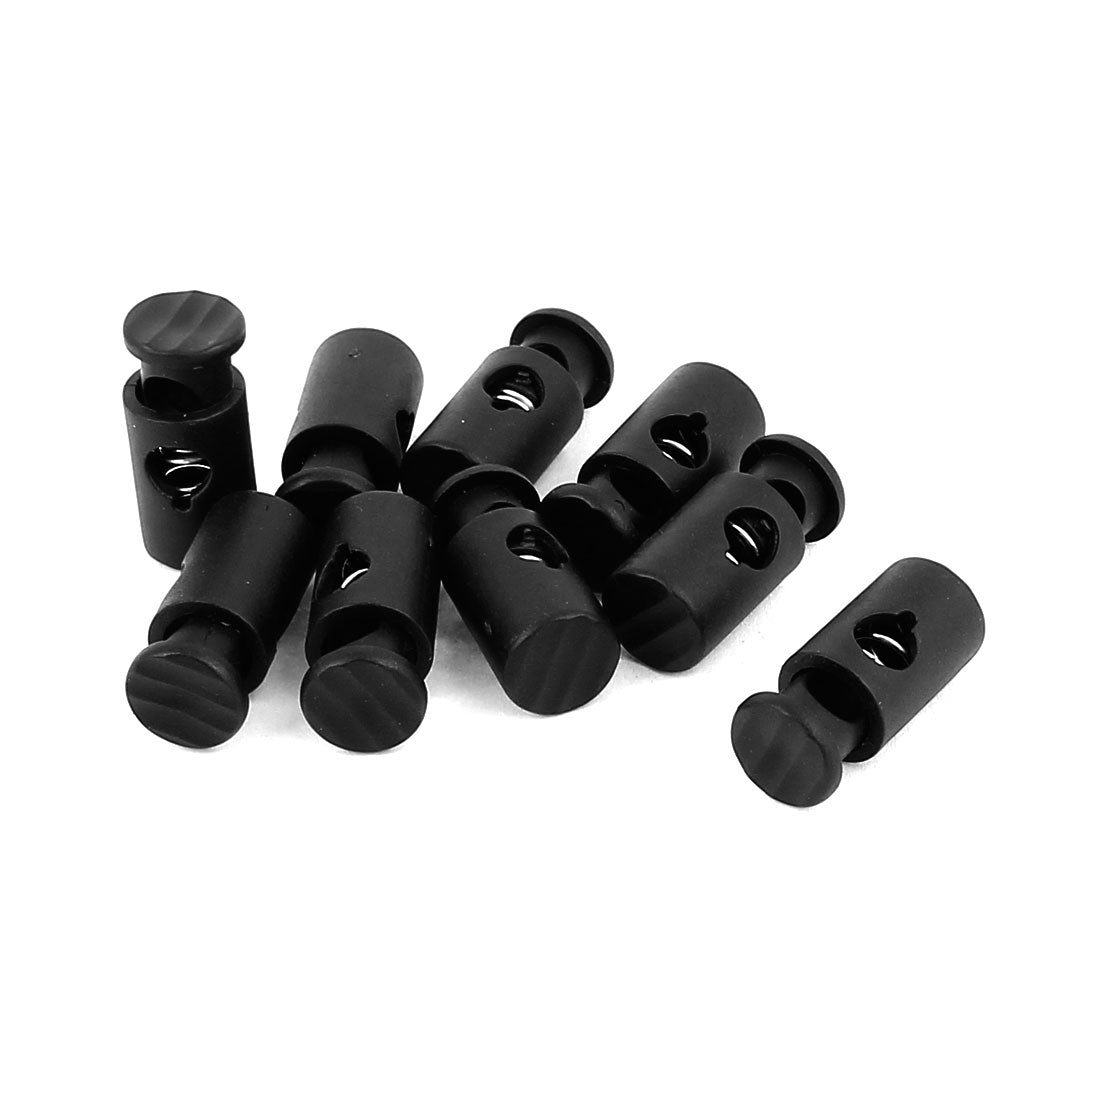 uxcell Uxcell 9pcs 6mm Dia Black Plastic Spring Loaded Single Hole Toggle Drawstring Stop Cord Lock